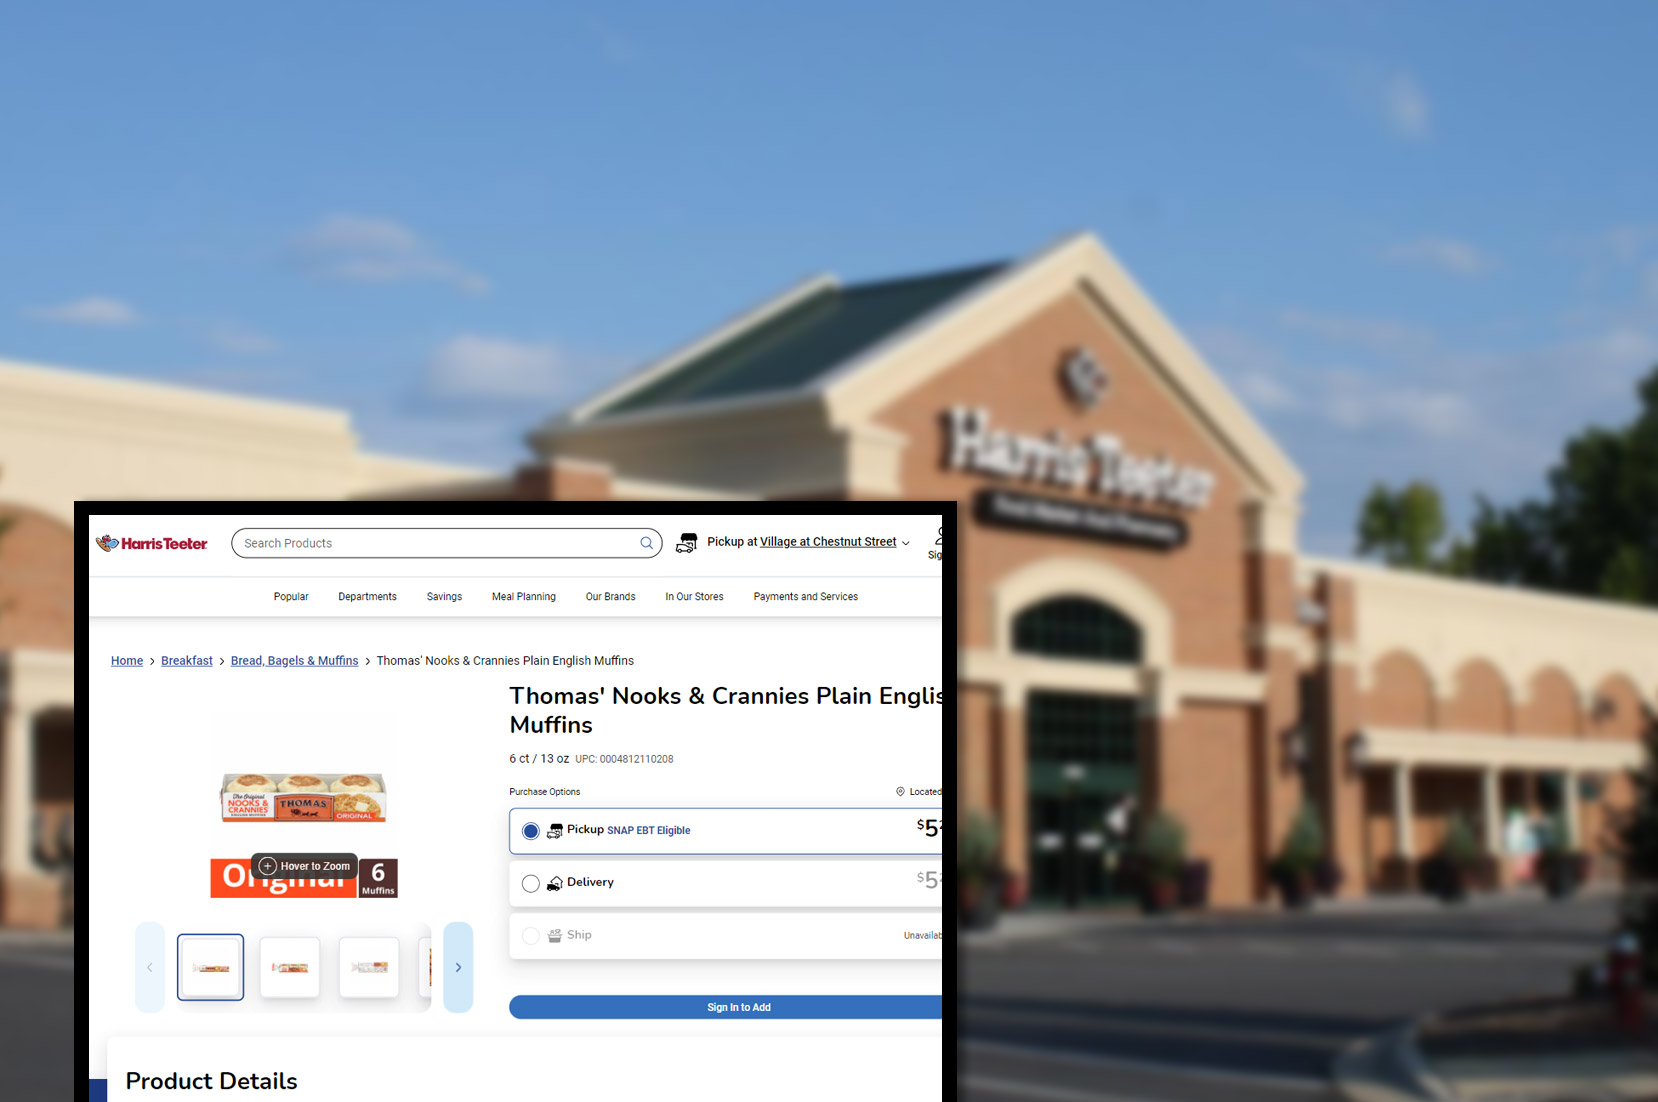 harristeeter-comproduct-pricing-information-and-image-scraping-services